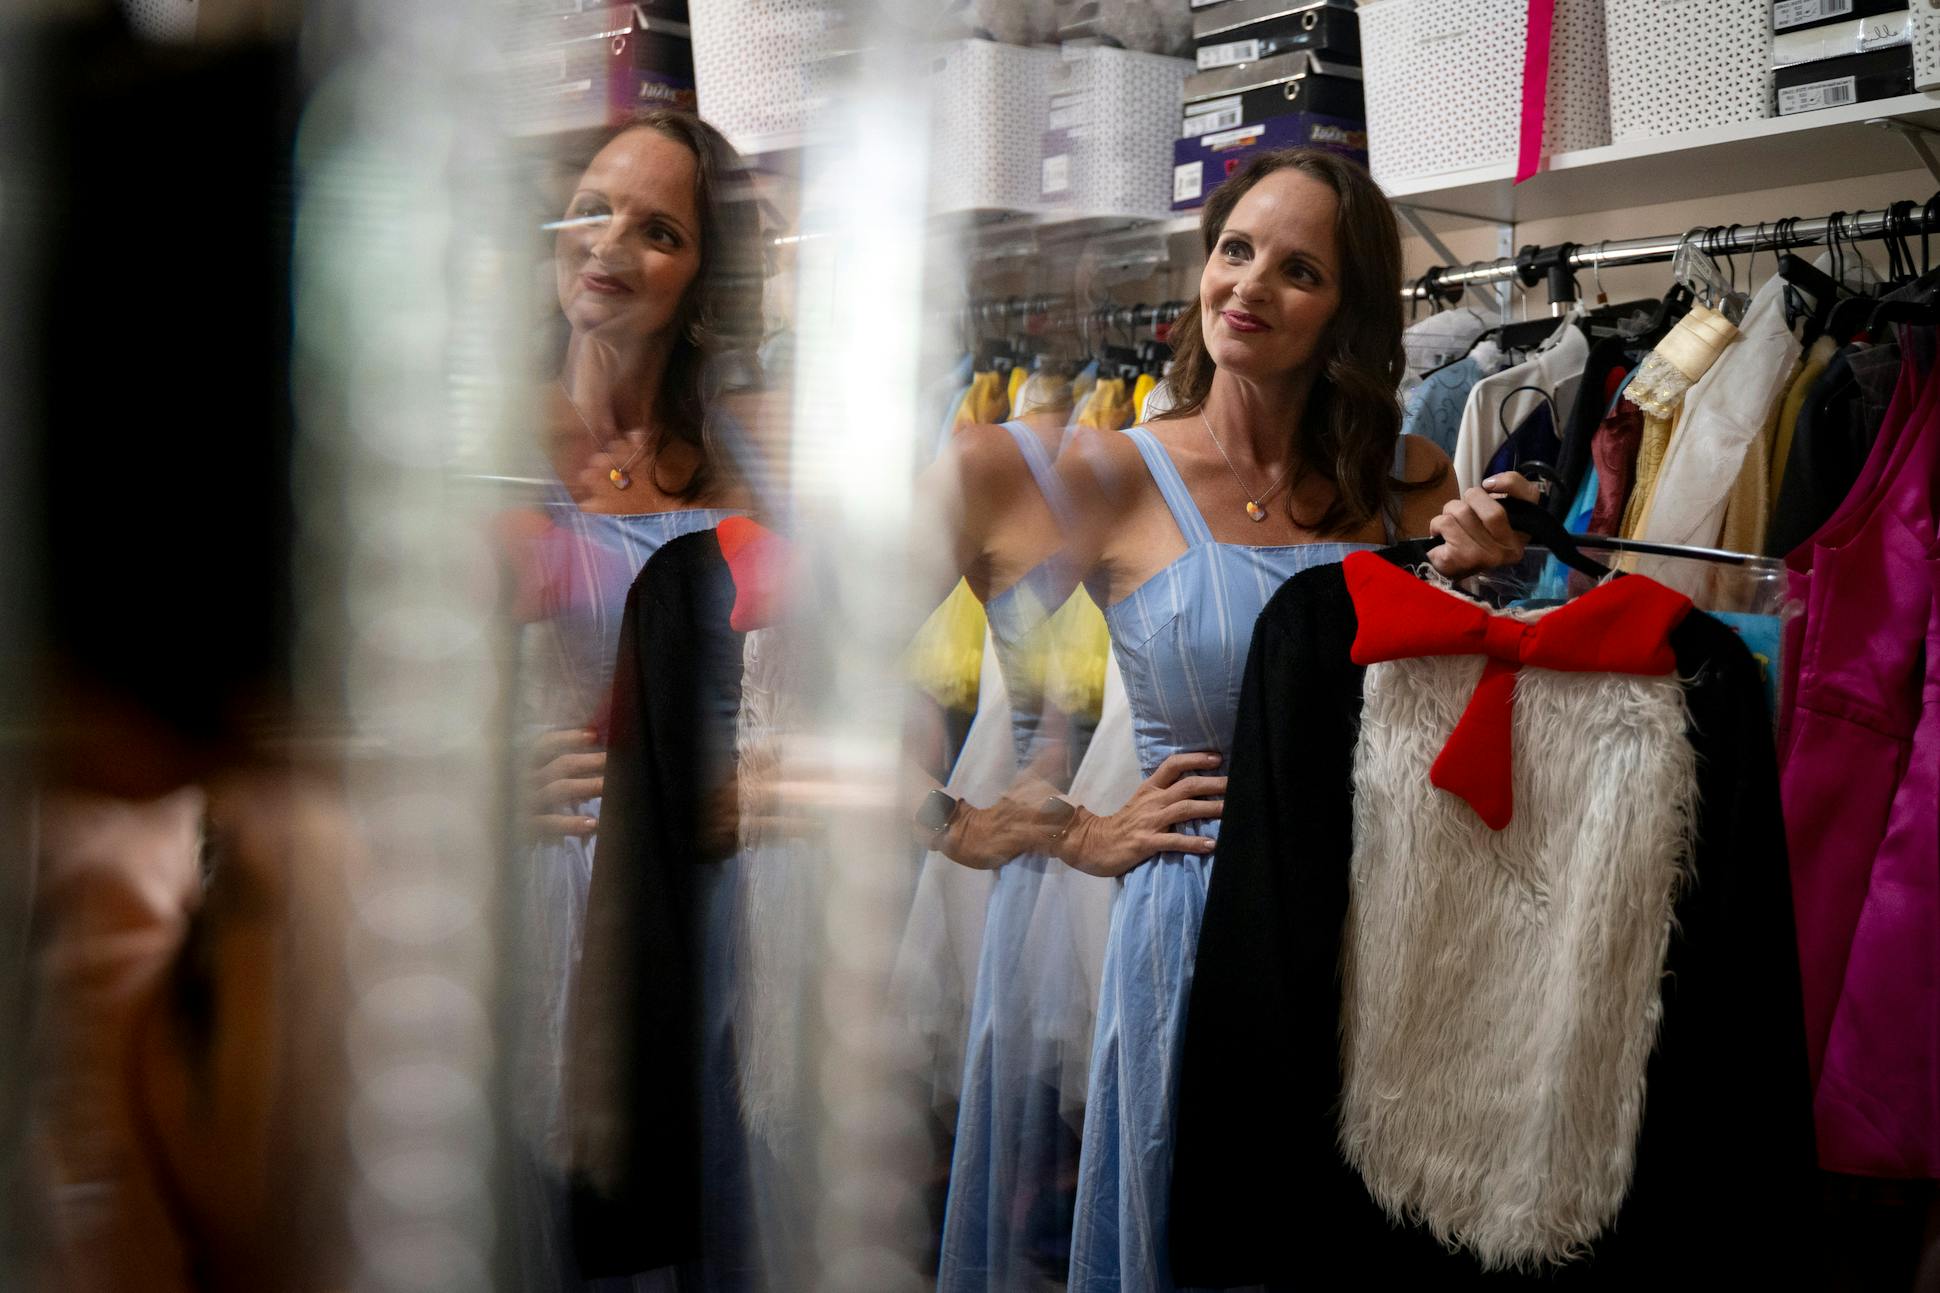 Fenstad has nearly 100 costumes in her Plymouth home for the 700-plus gigs she performs a year.